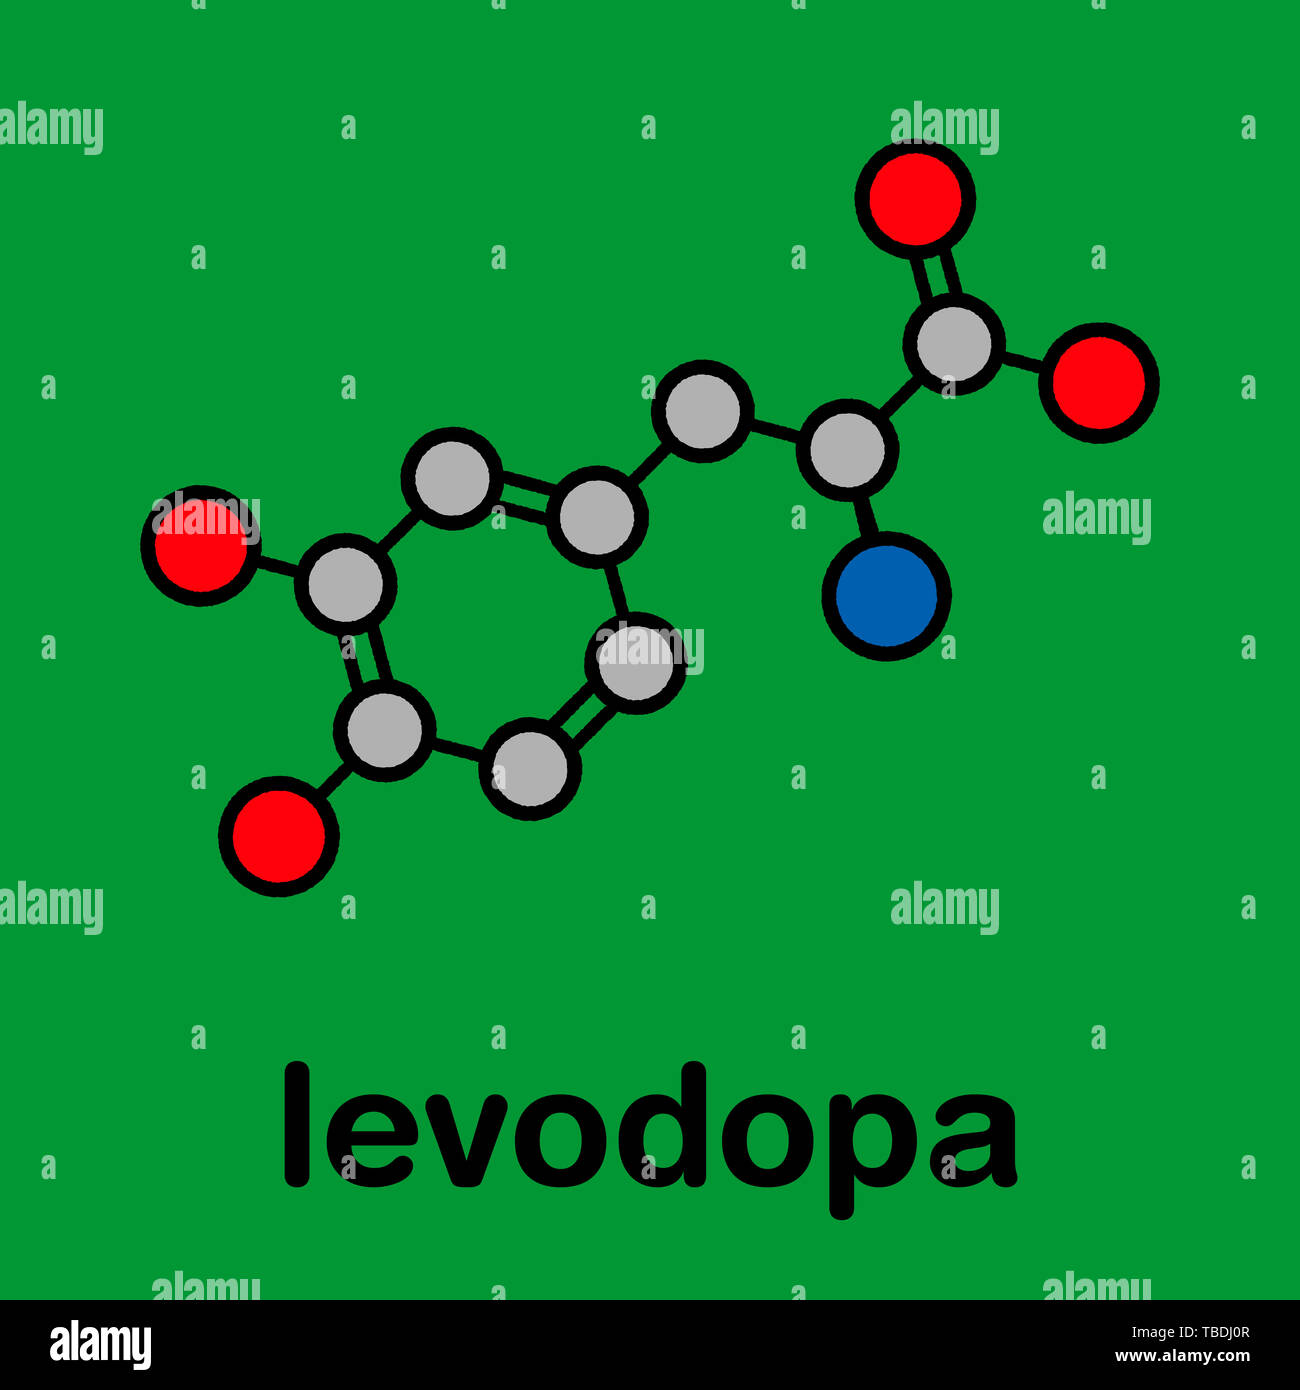 L-DOPA (levodopa) Parkinson's disease drug molecule. Stylized skeletal formula (chemical structure). Atoms are shown as color-coded circles with thick black outlines and bonds: hydrogen (hidden), carbon (grey), oxygen (red), nitrogen (blue). Stock Photo